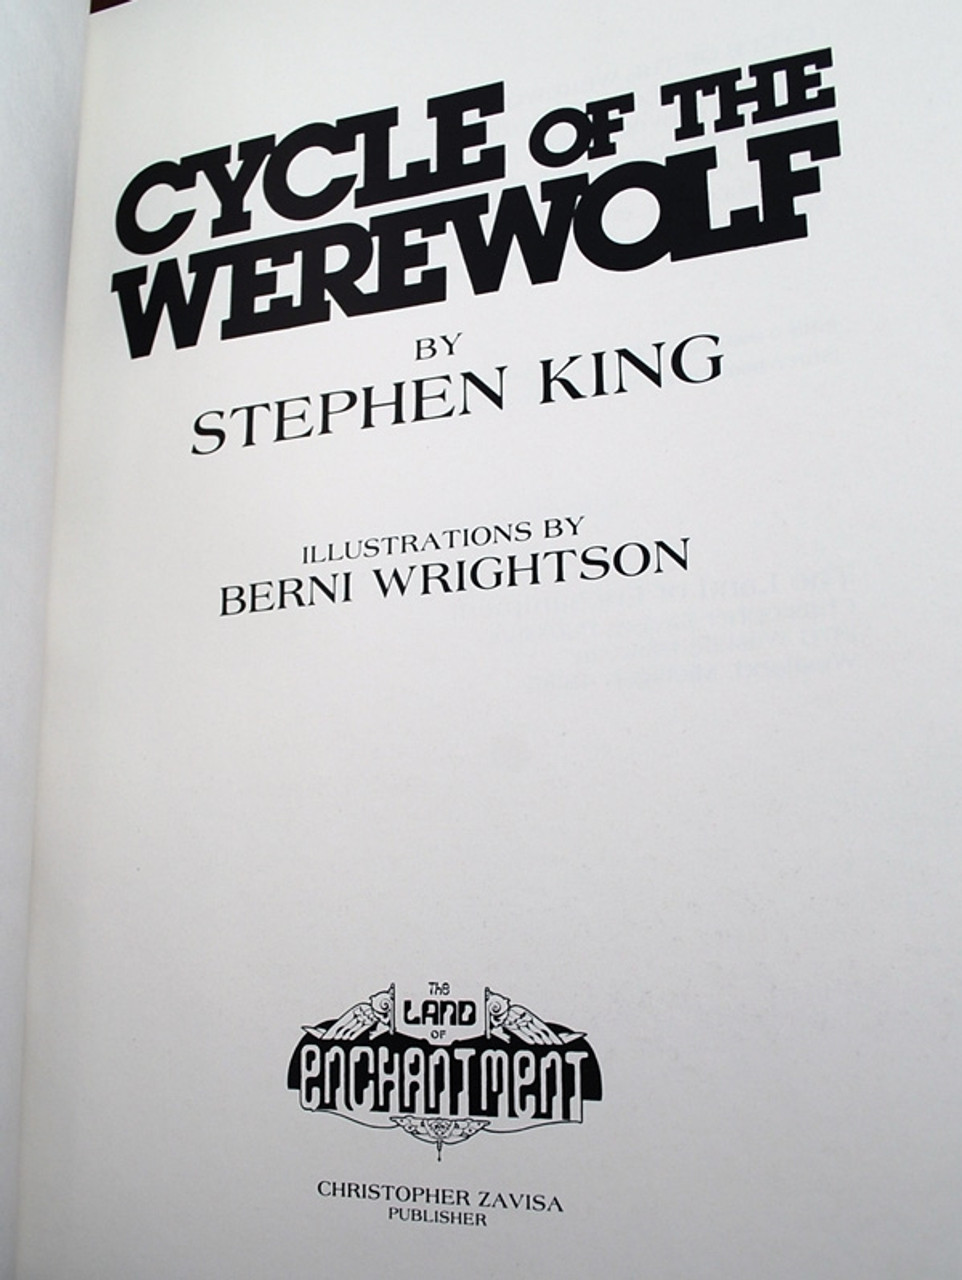 Stephen King Cycle of Werewolf Signed